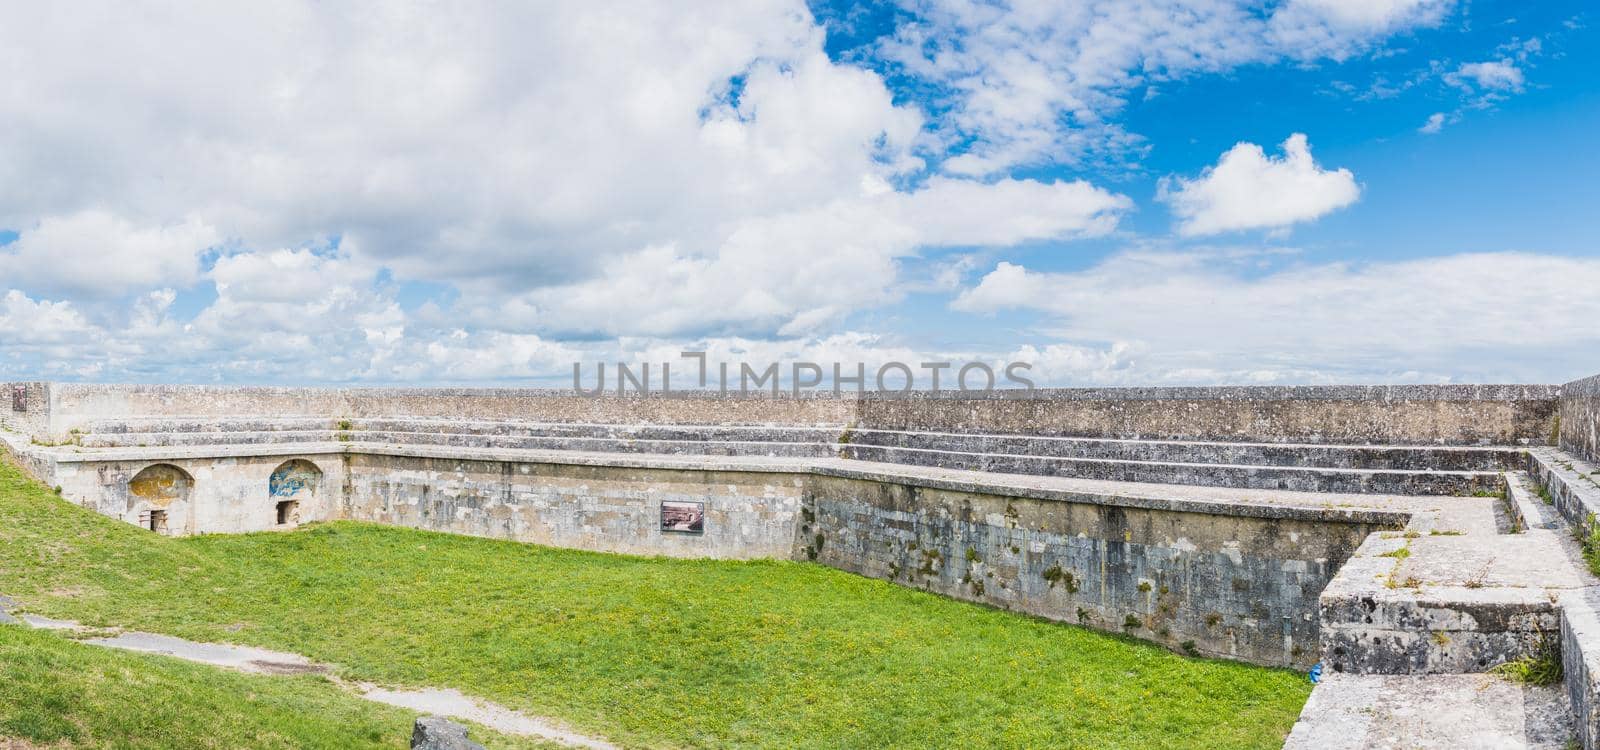 Panorama of the Fortifications of the citadel of Chateau d'Oléron on the Ile d'Oléron in France